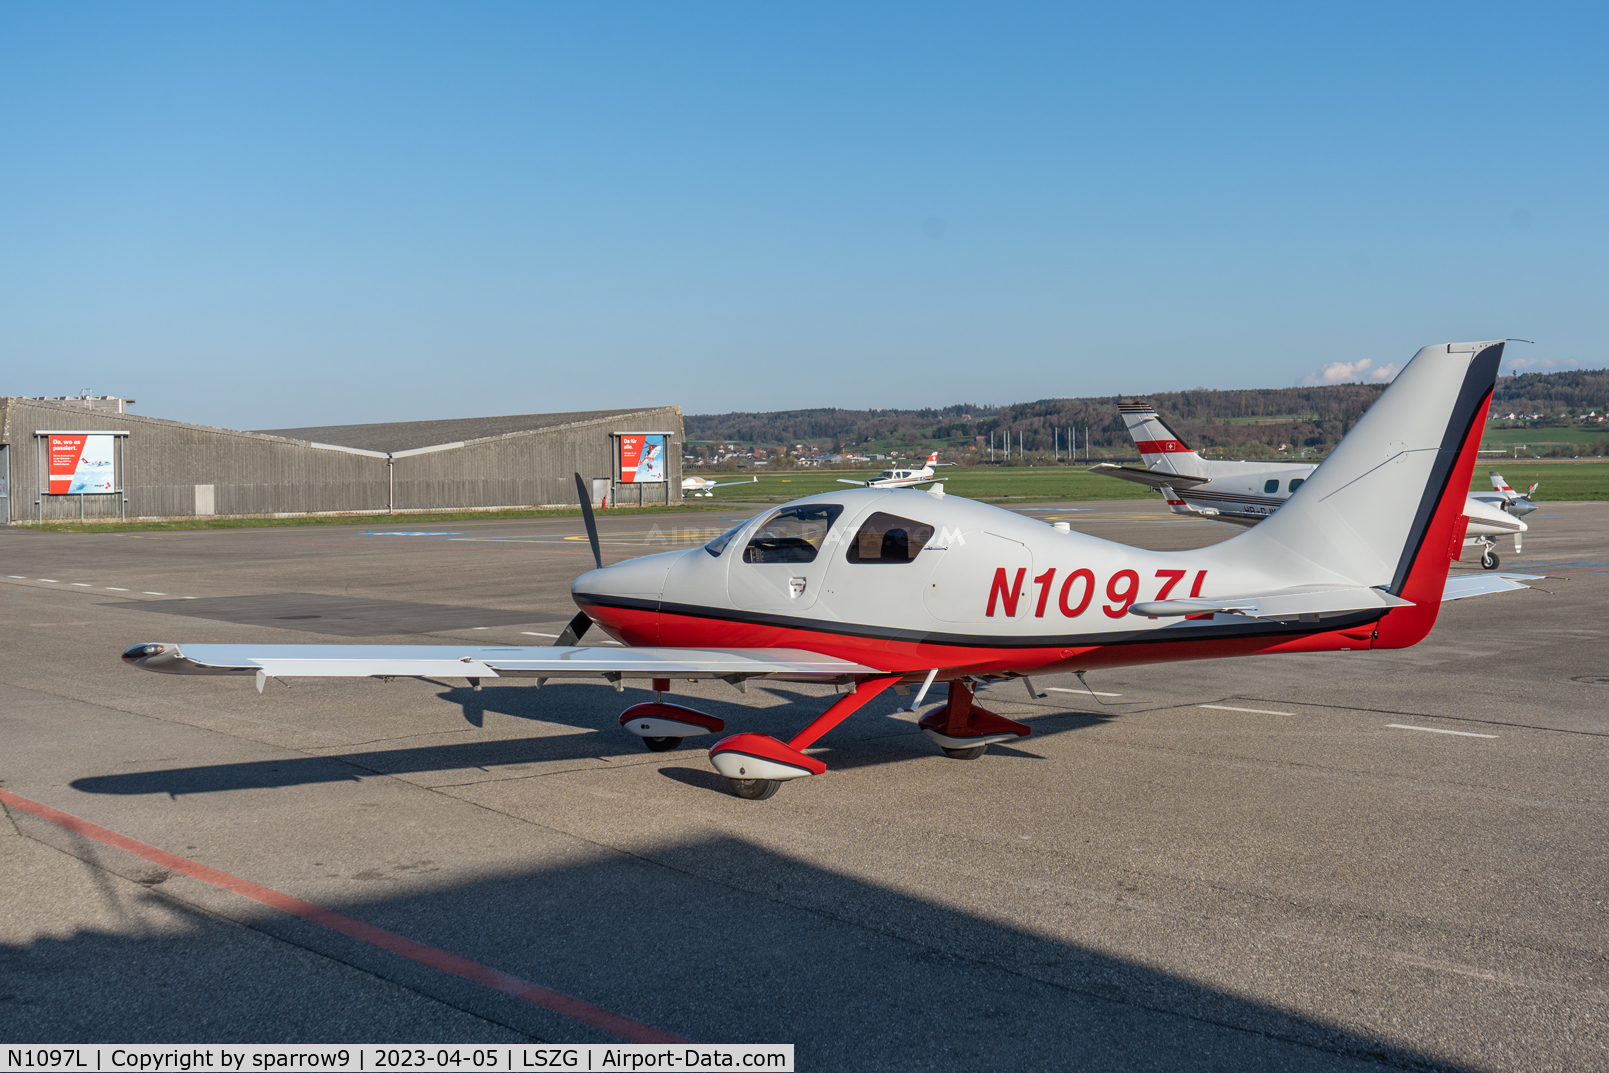 N1097L, 2008 Cessna LC42-550FG C/N 421006, At Grenchen